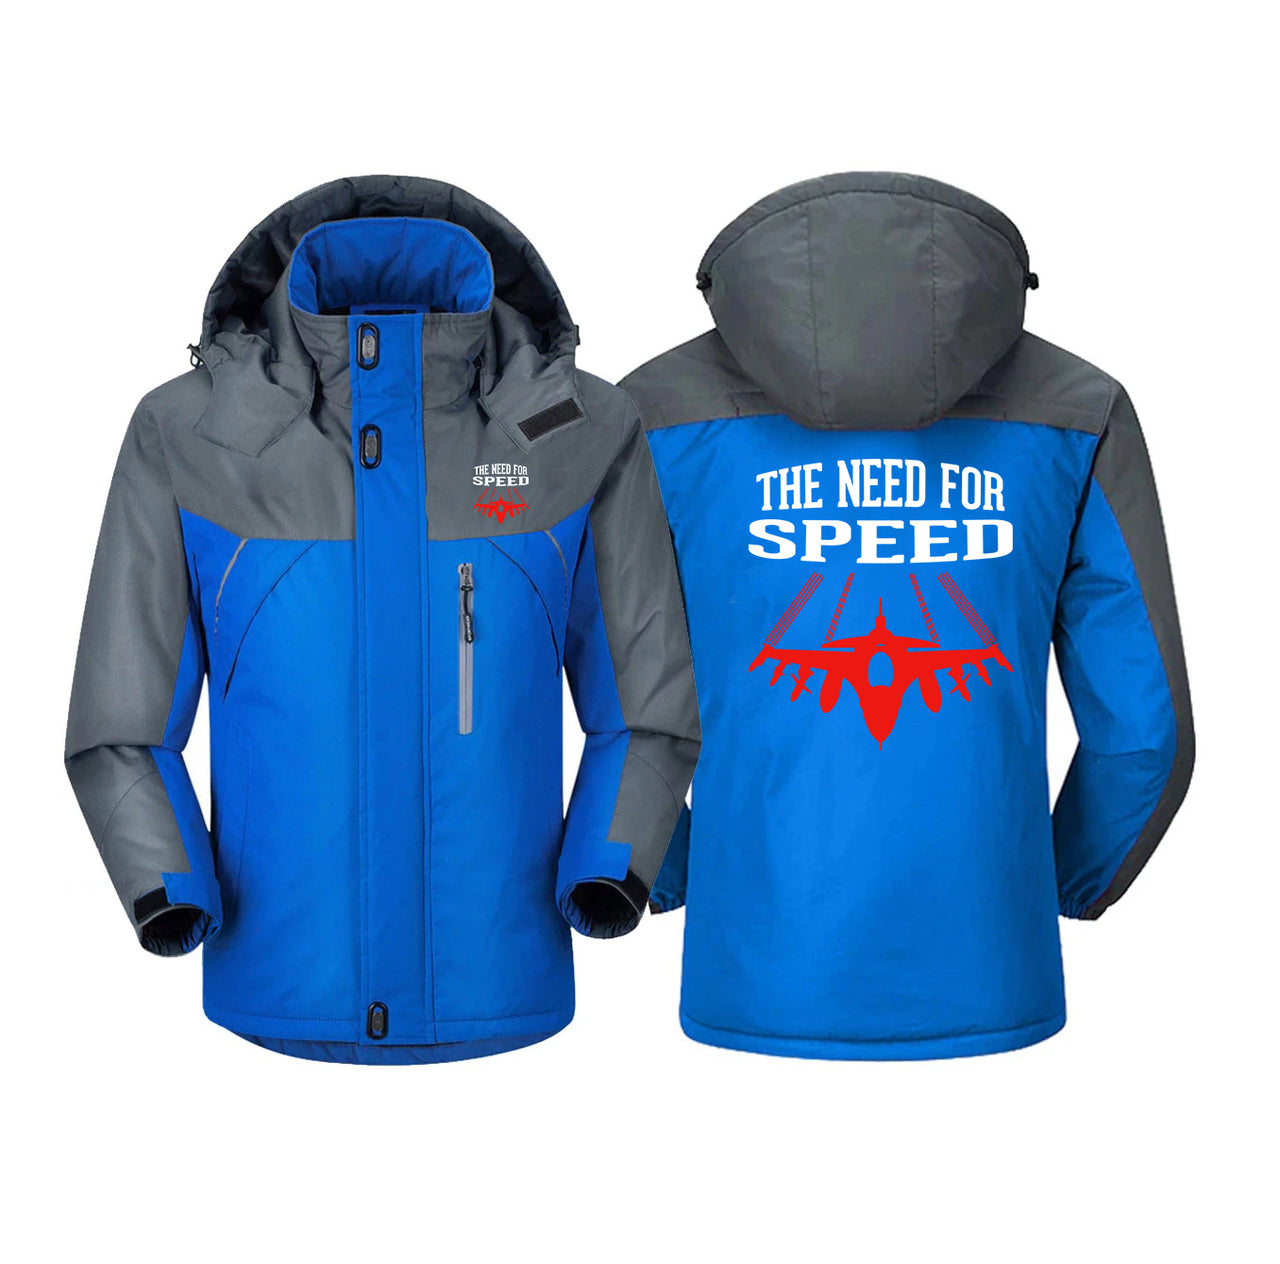 The Need For Speed Designed Thick Winter Jackets